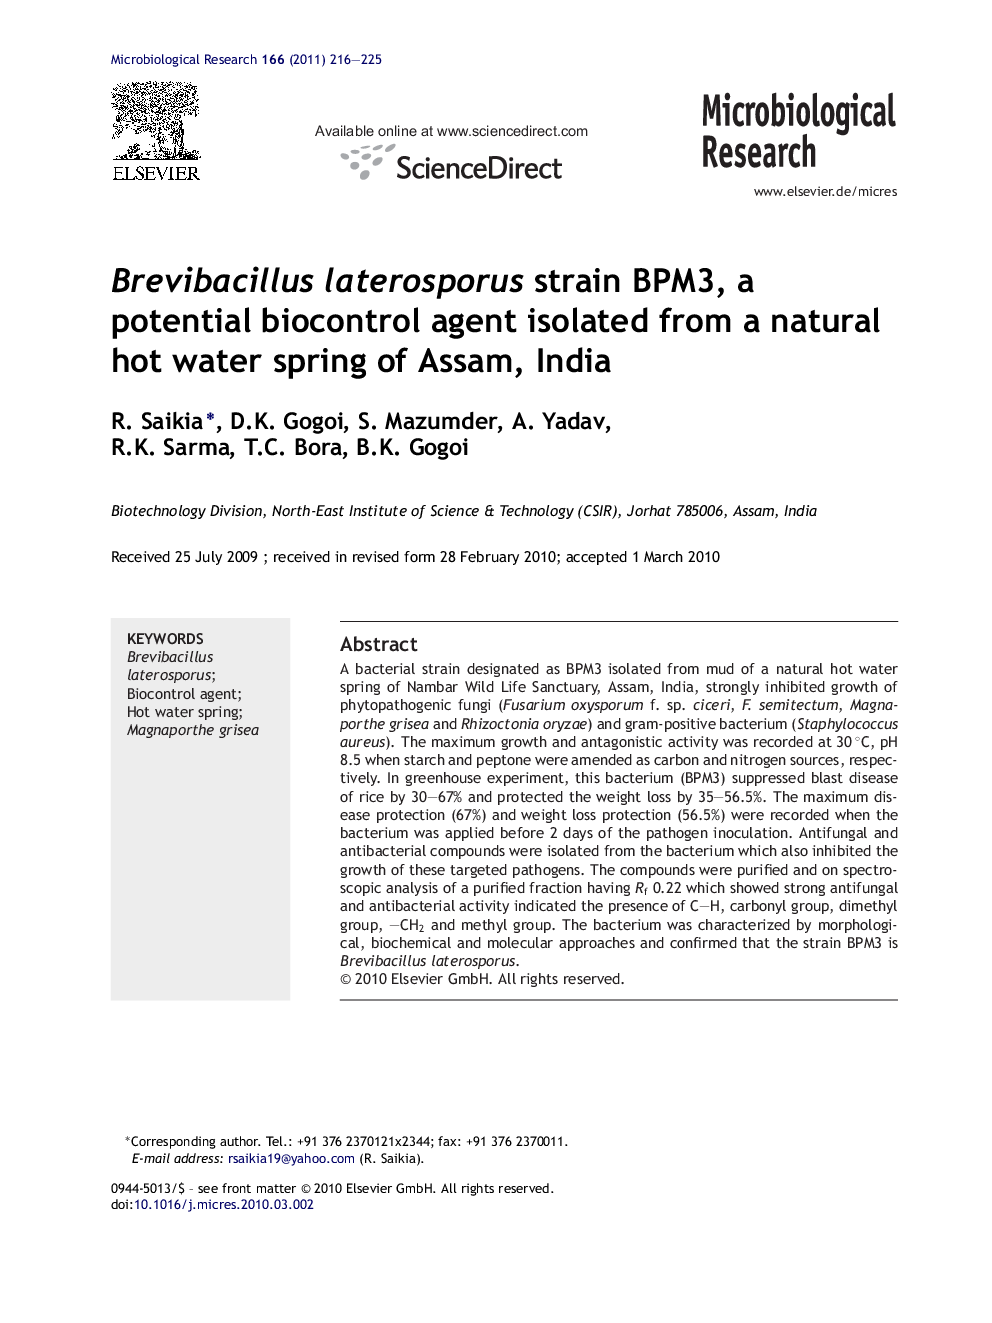 Brevibacillus laterosporus strain BPM3, a potential biocontrol agent isolated from a natural hot water spring of Assam, India